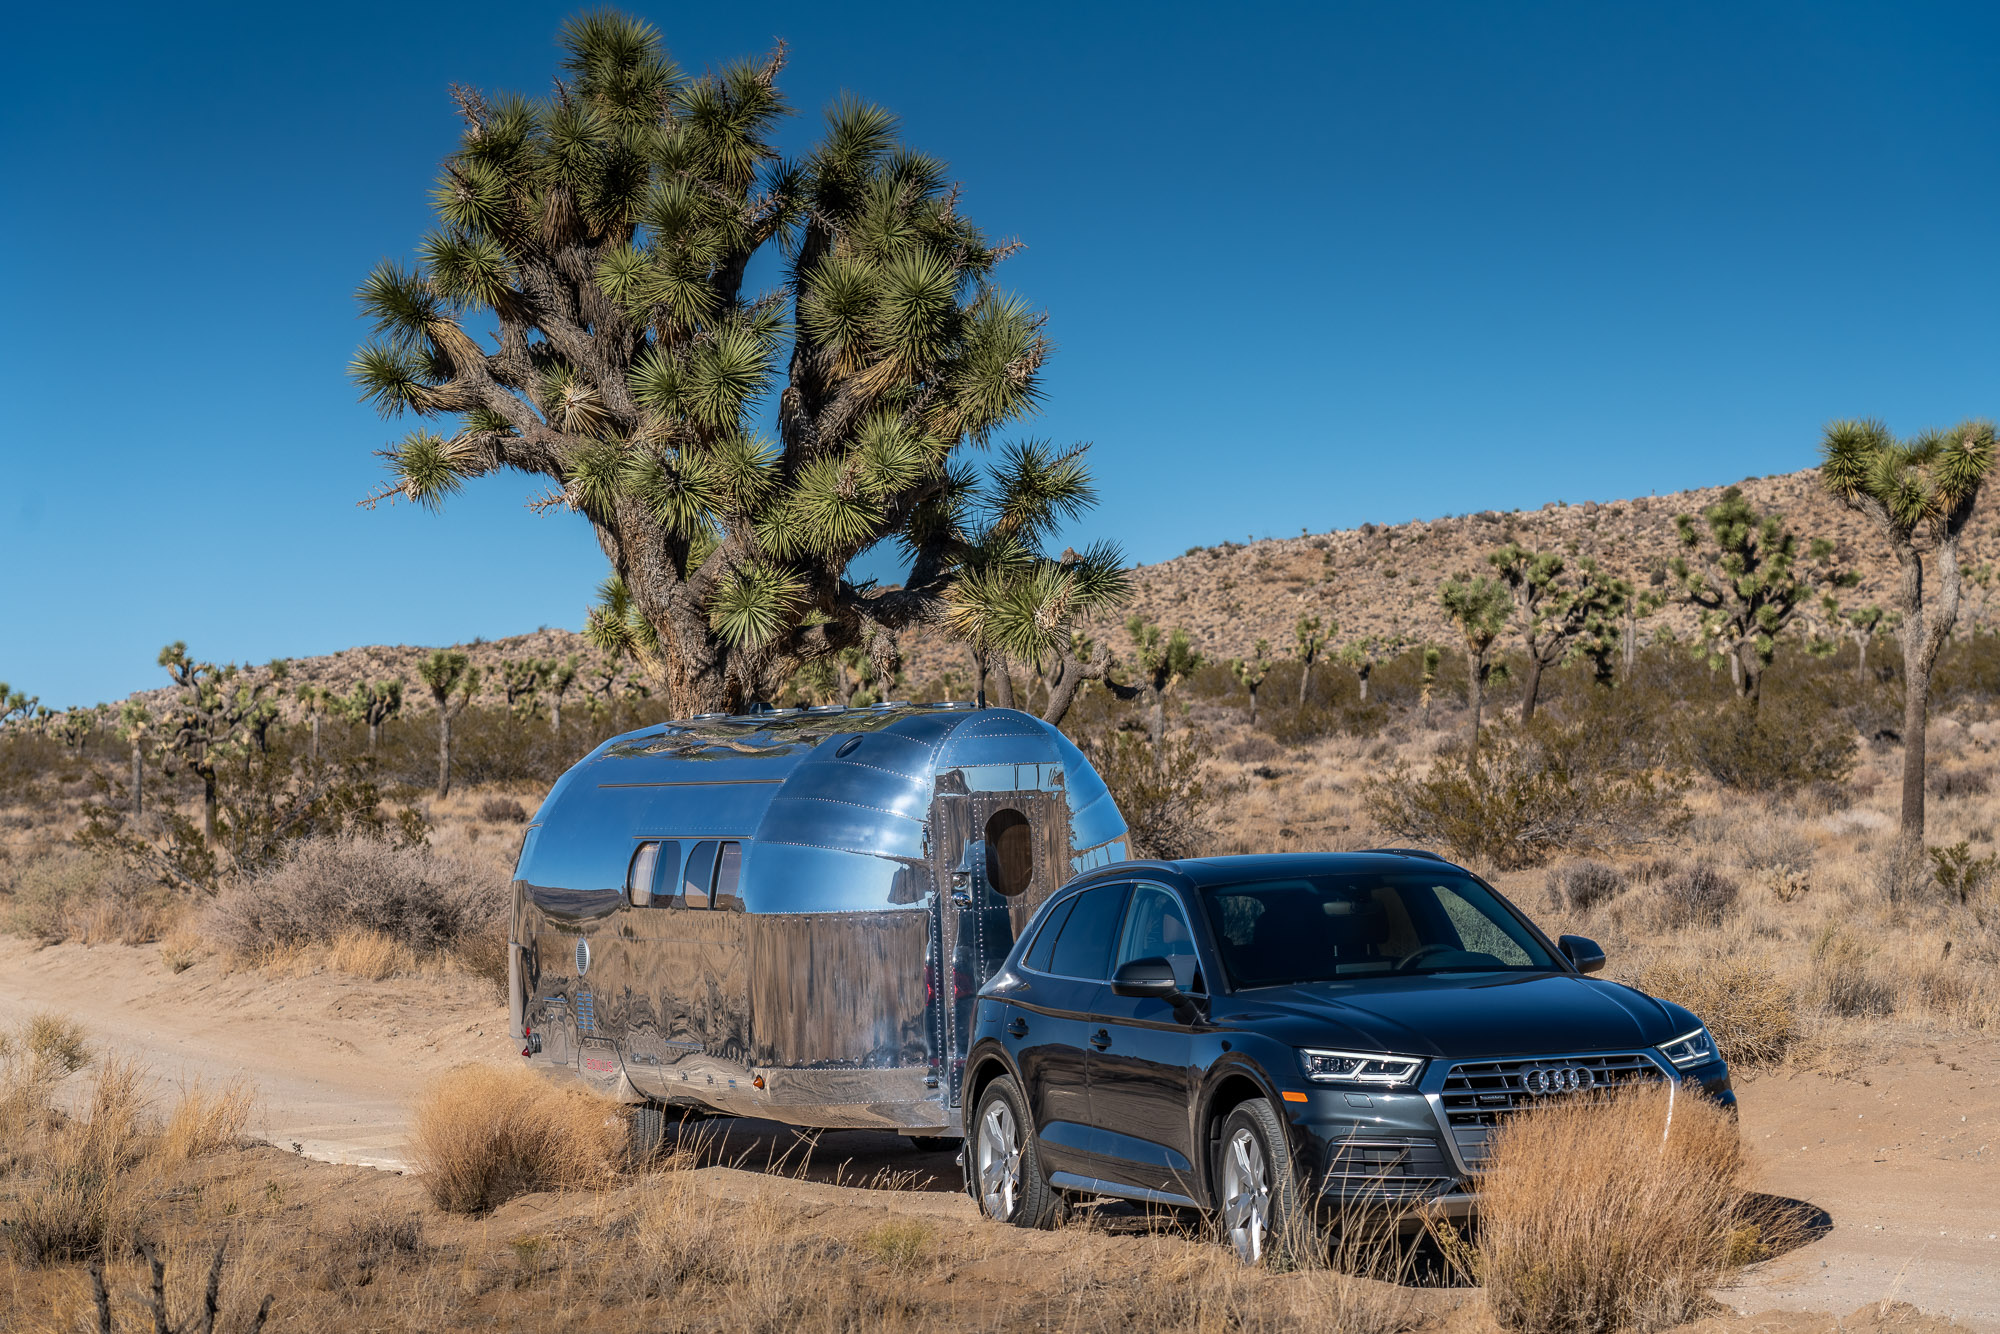 Bowlus® is Built for Luxurious Off Grid Adventures